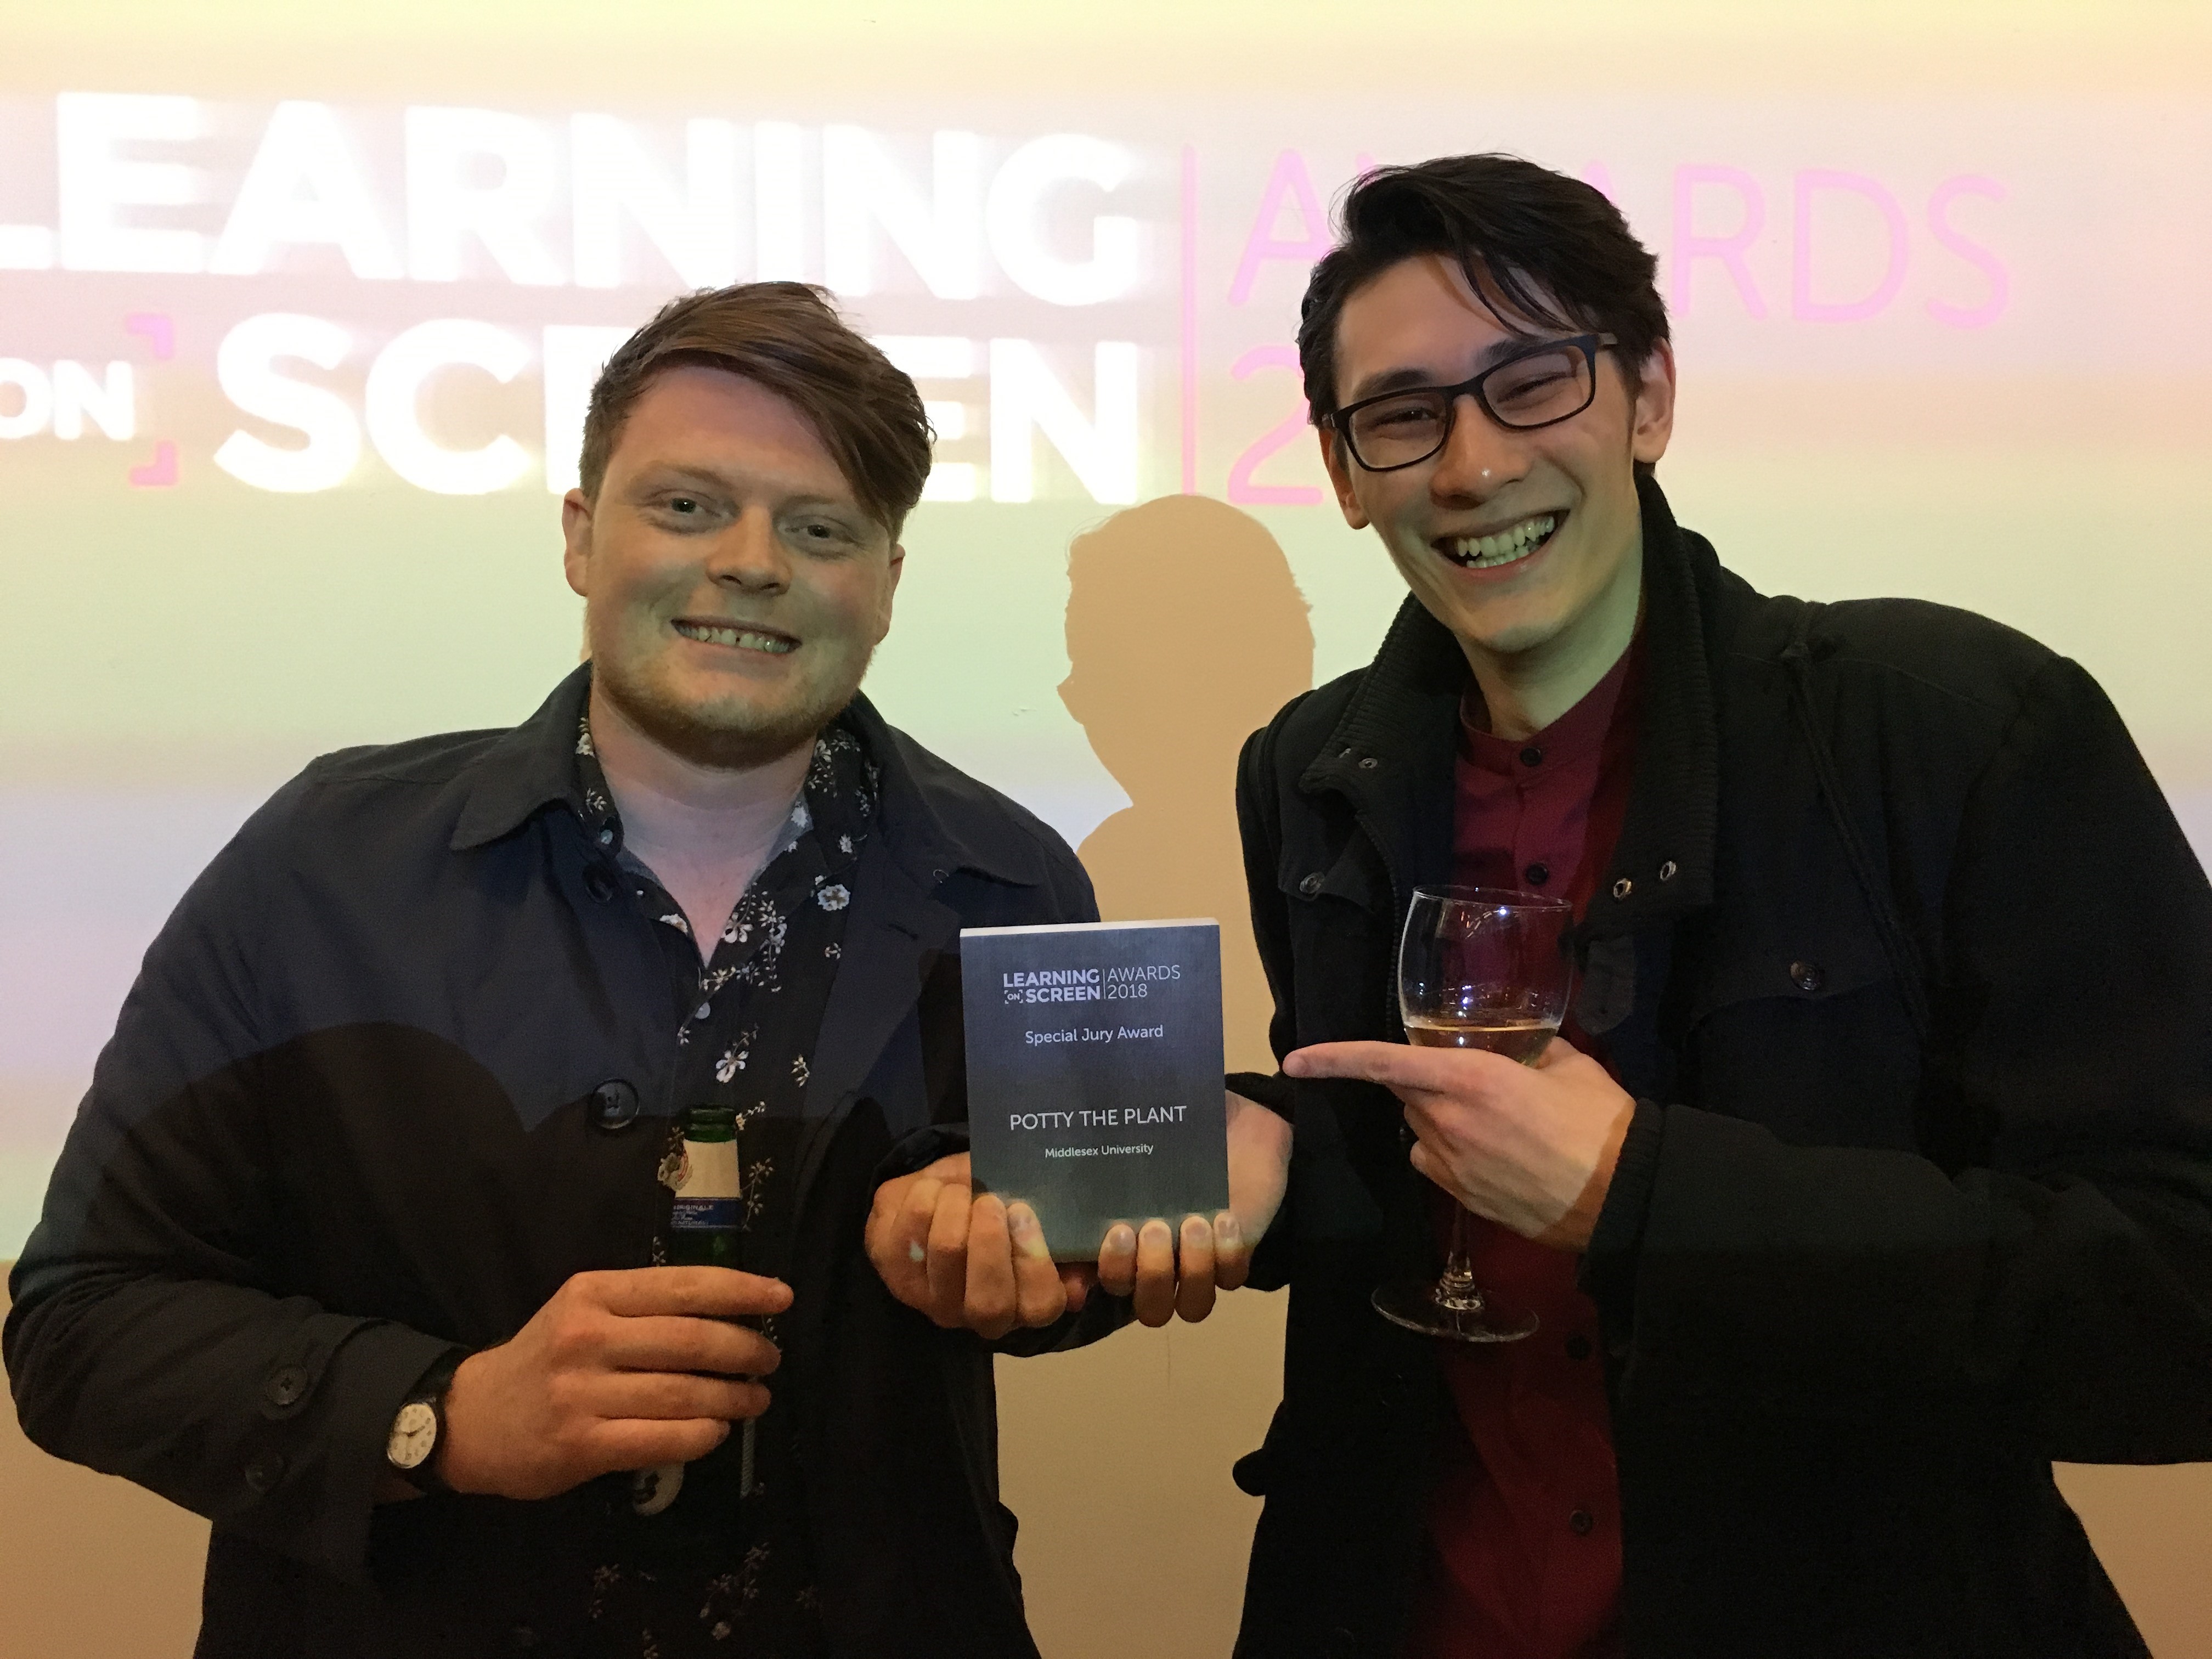 Two men at an award ceremony hold up their prize.